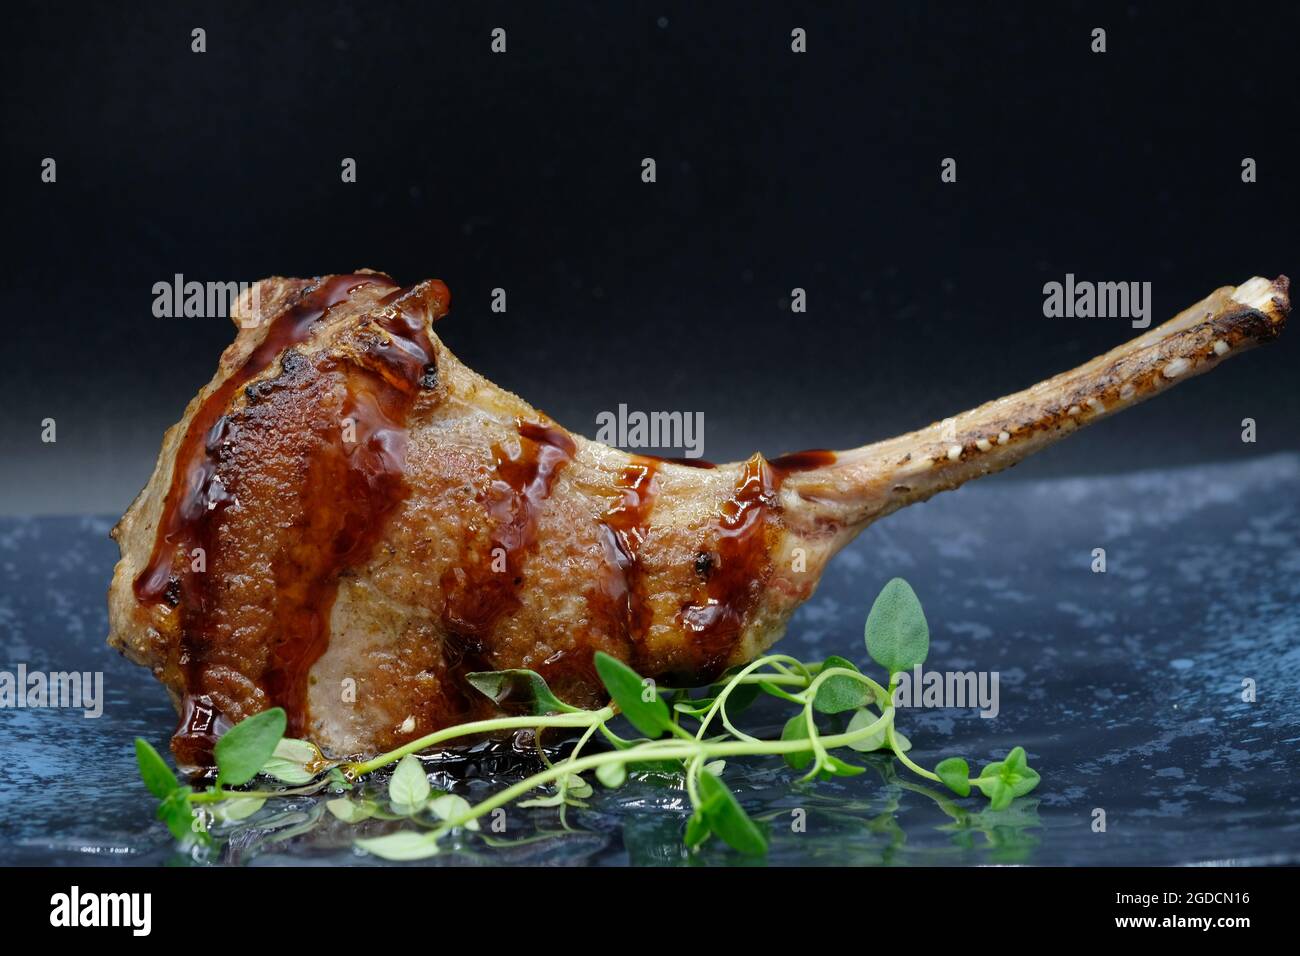 One piece of tasty lamb steak with meat juice served on grey food plate with green vegetable as decoration, with a dark background. Stock Photo